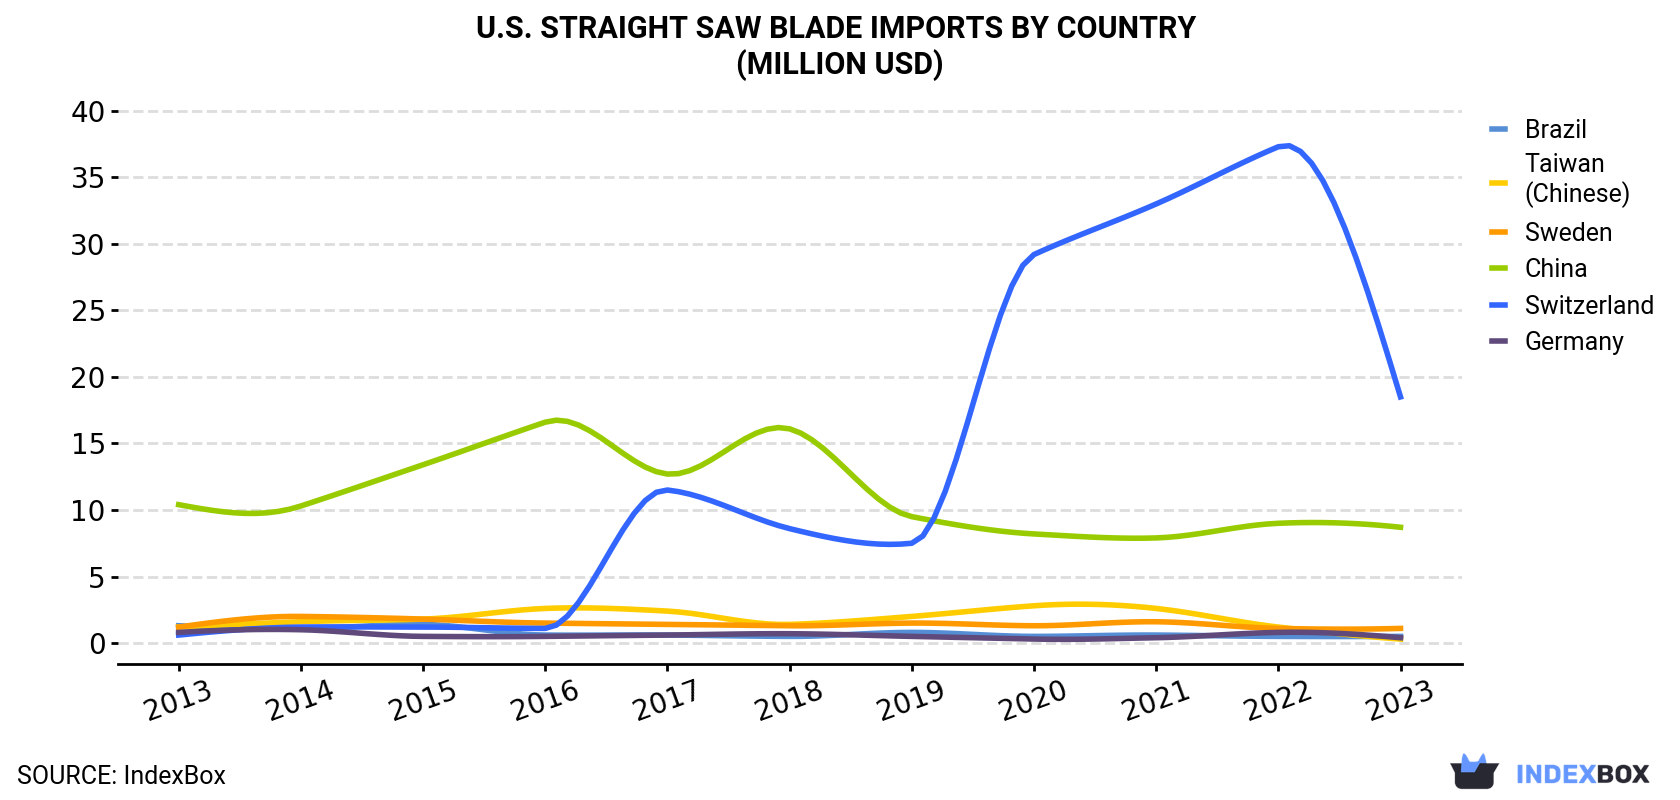 U.S. Straight Saw Blade Imports By Country (Million USD)